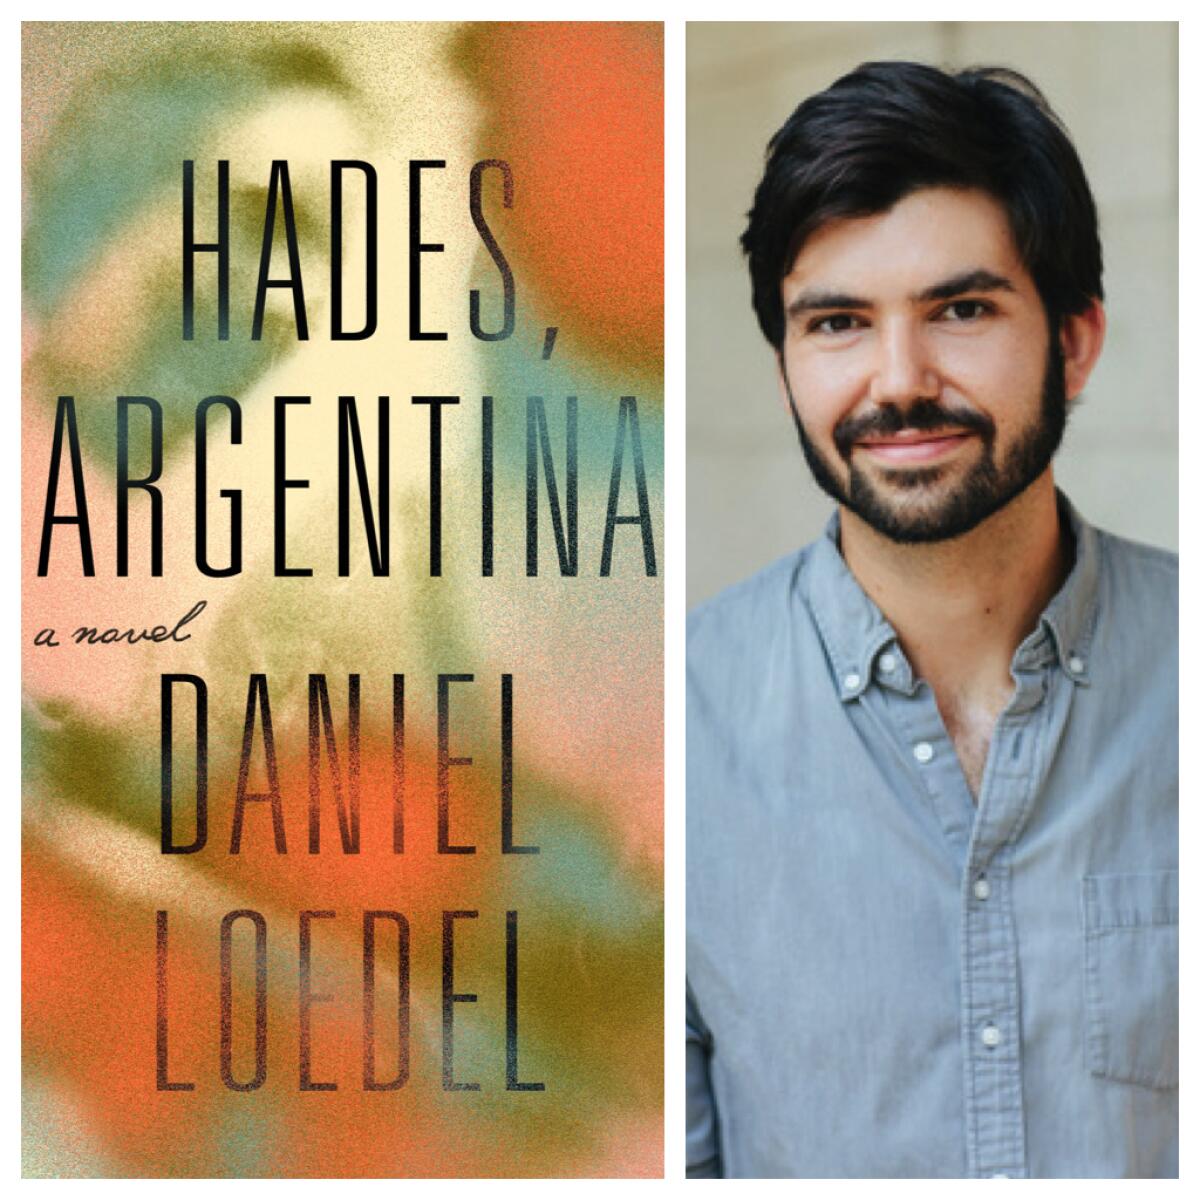 "Hades, Argentina," a debut about evil and repentance from Daniel Loedel.